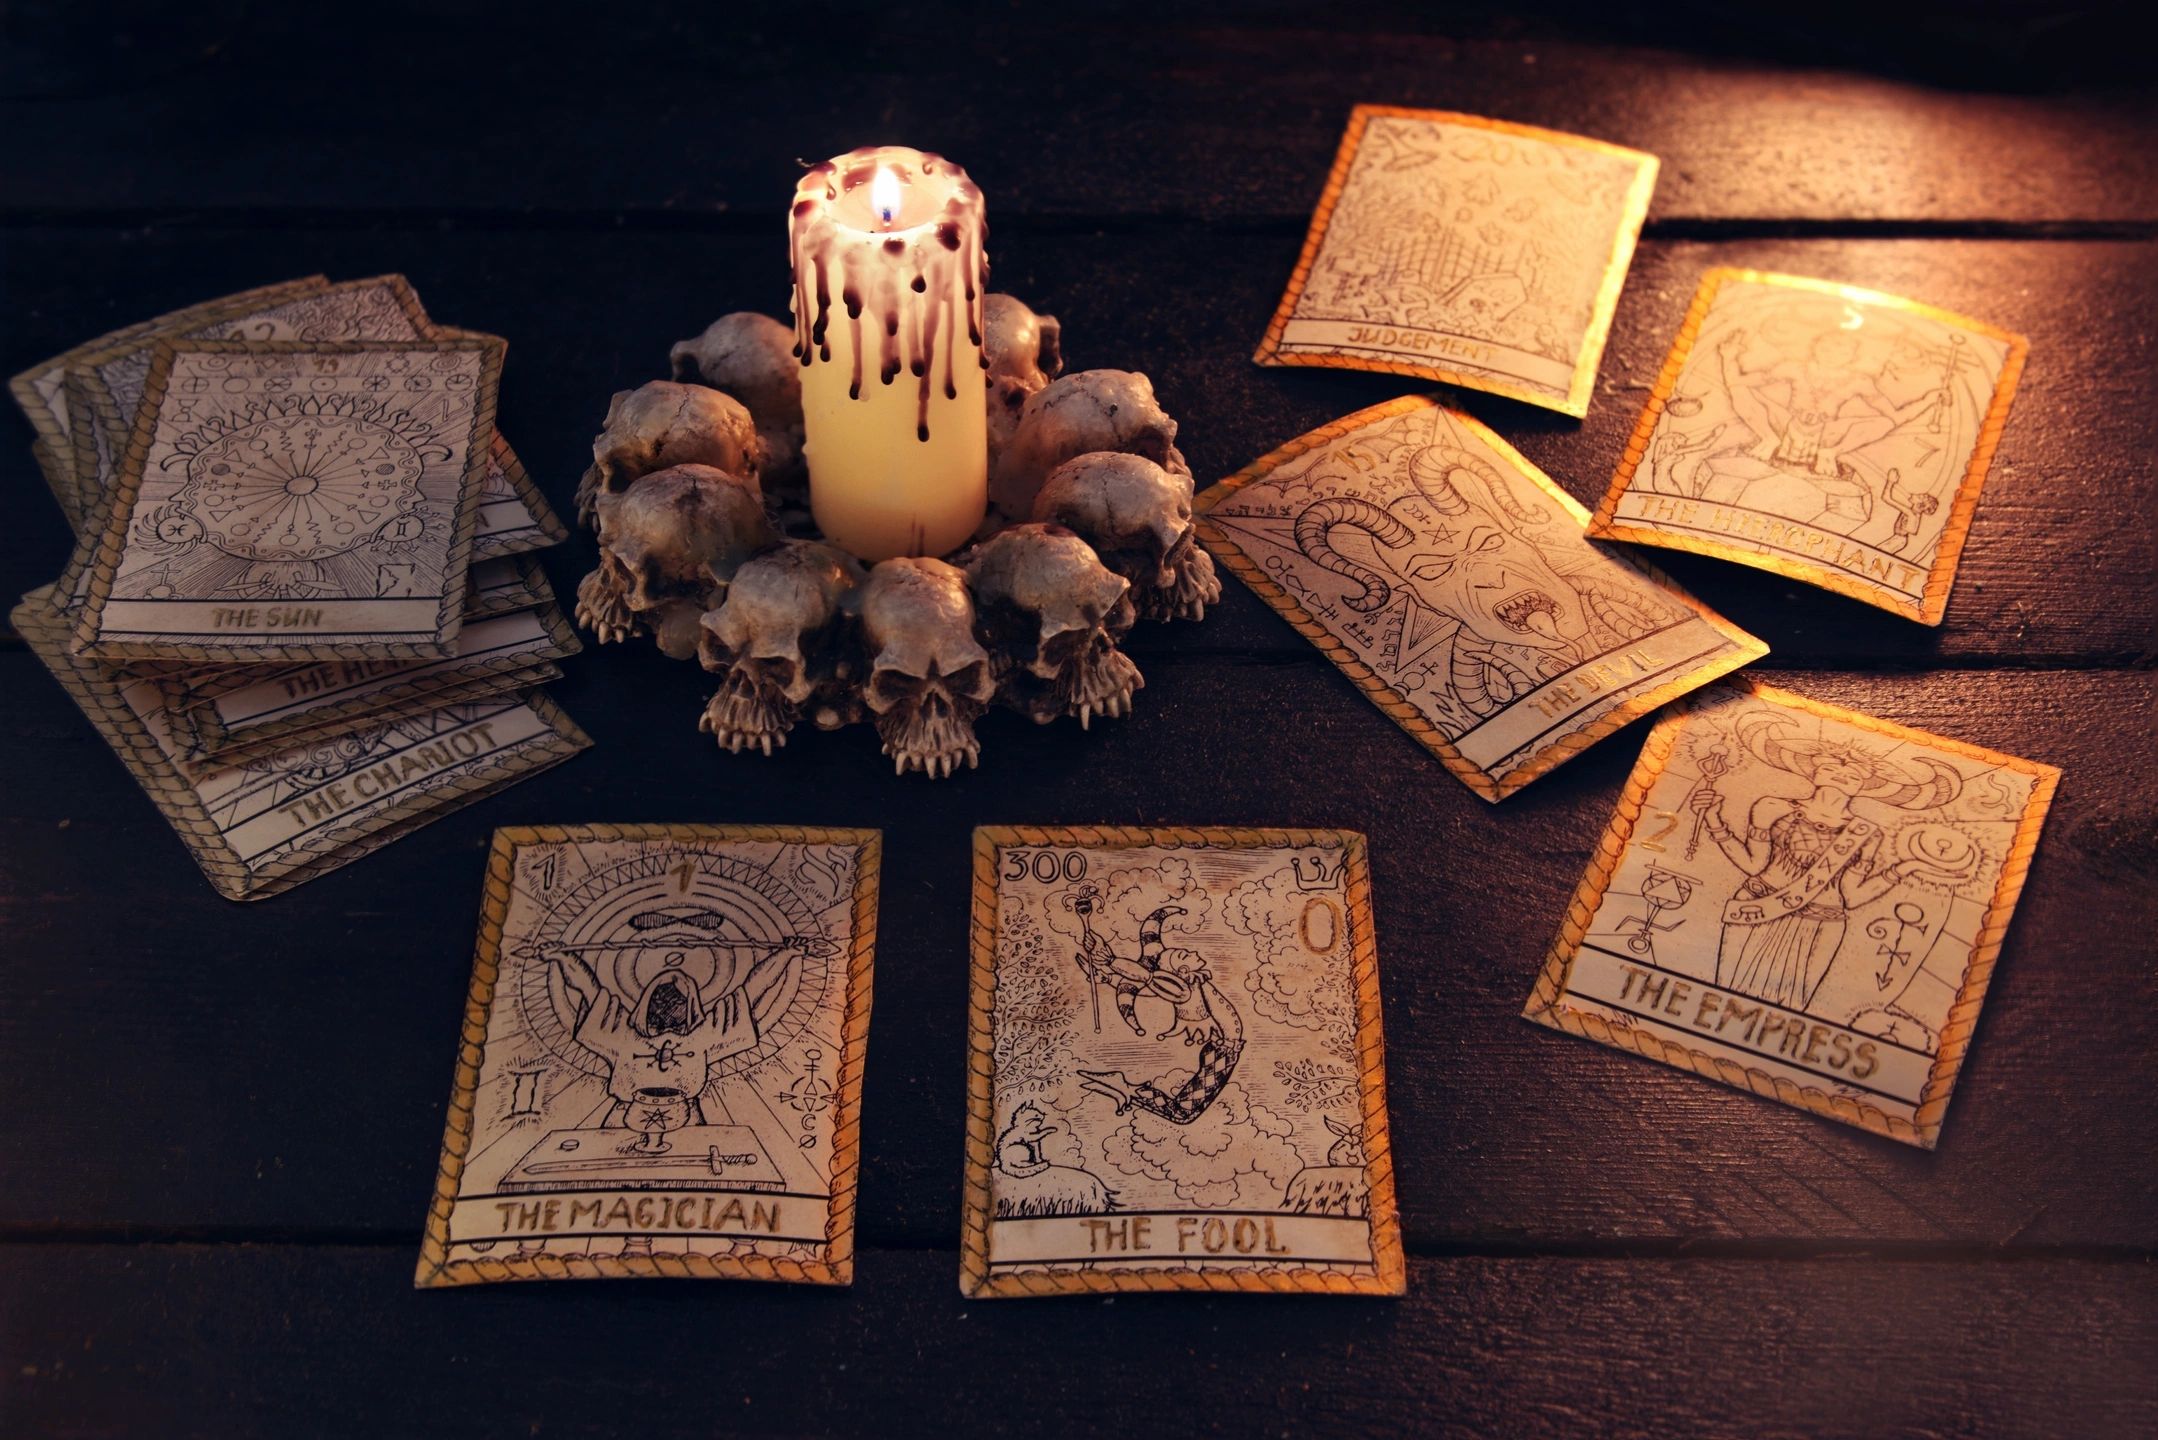 A lit pillar candle sits within a circle of skulls on a wooden table surrounded by tarot cards